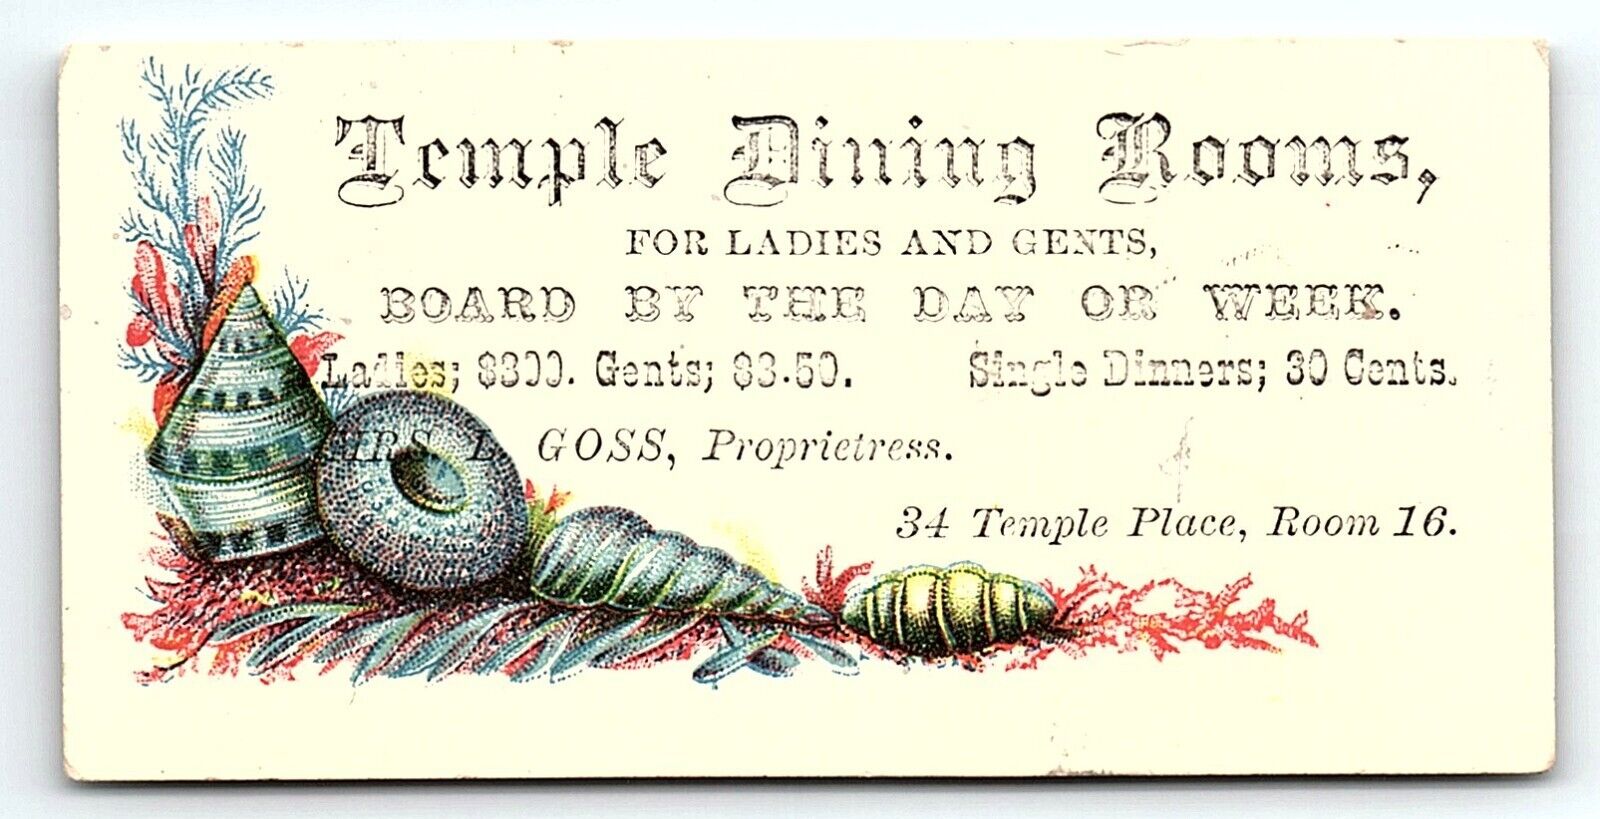 c1880 TEMPLE DINING ROOMS BOARD BY DAY OR WEEK GOSS VICTORIAN TRADE CARD Z1114